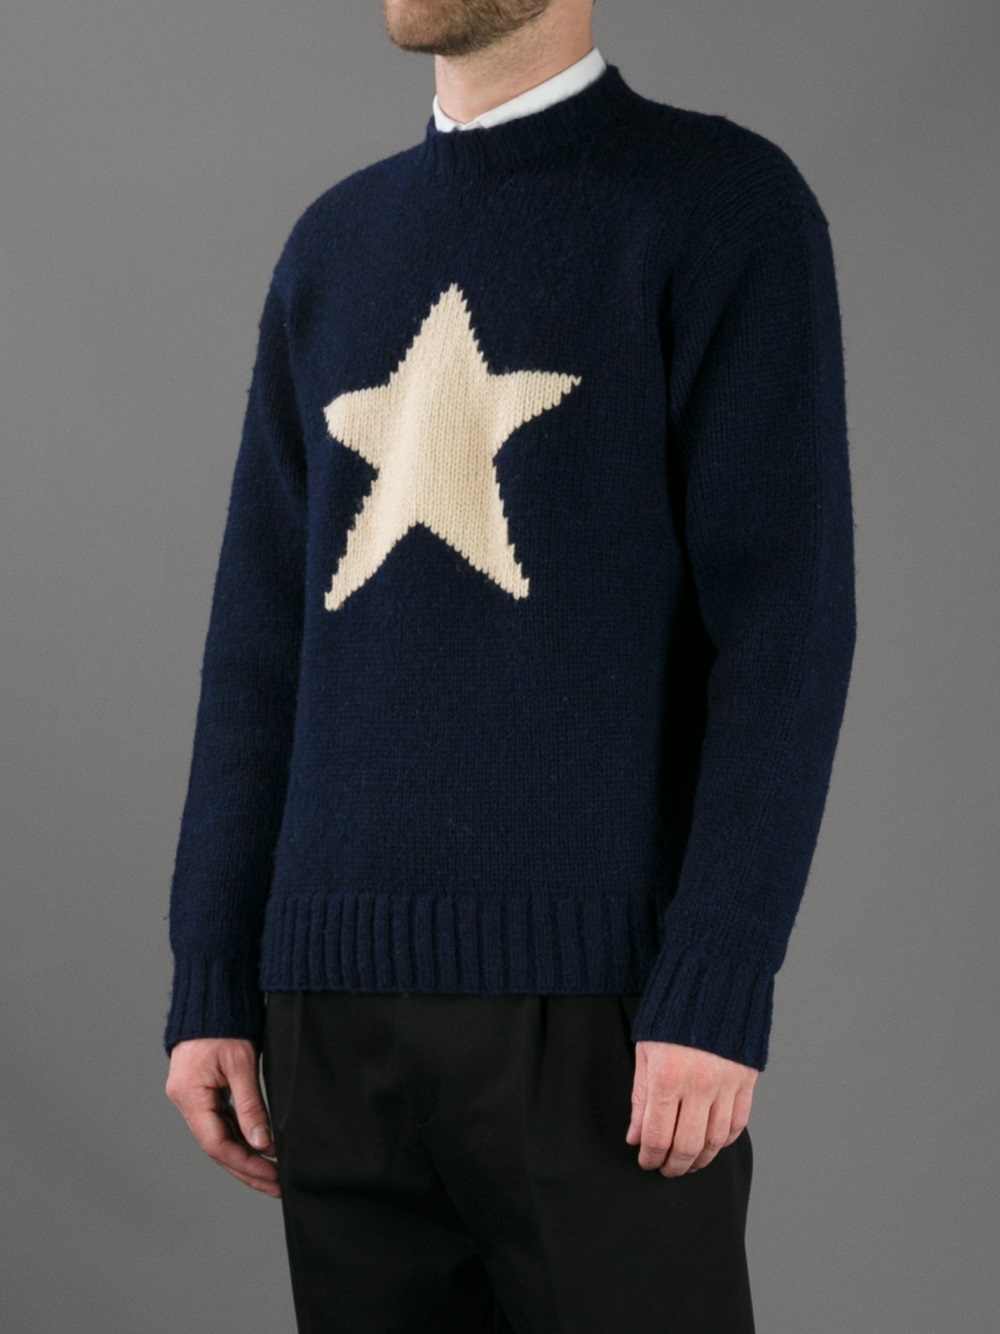 Polo Ralph Lauren Contrast Star Patch Sweater in Blue for Men | Lyst